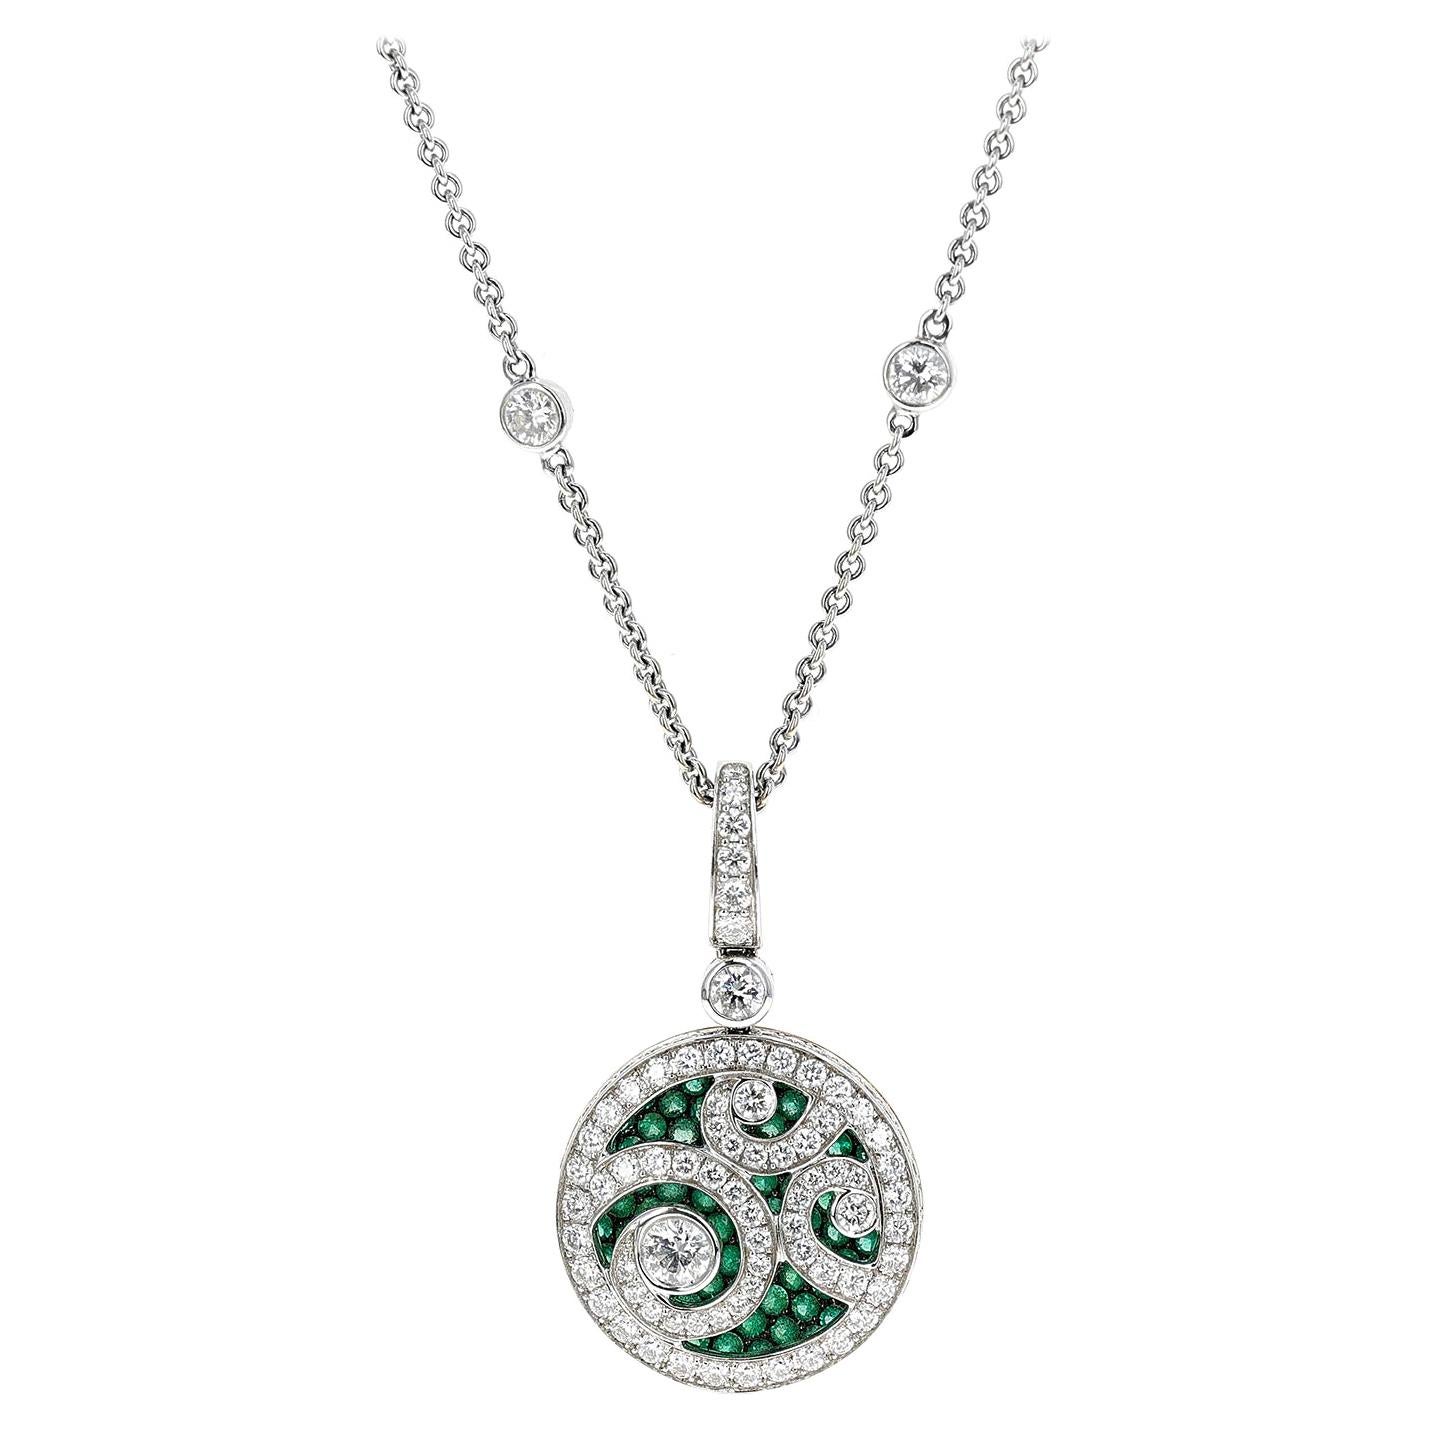 Graff 0.92 Cts. Emerald and 2.64 Ct. Diamond Pendant Necklace with Box